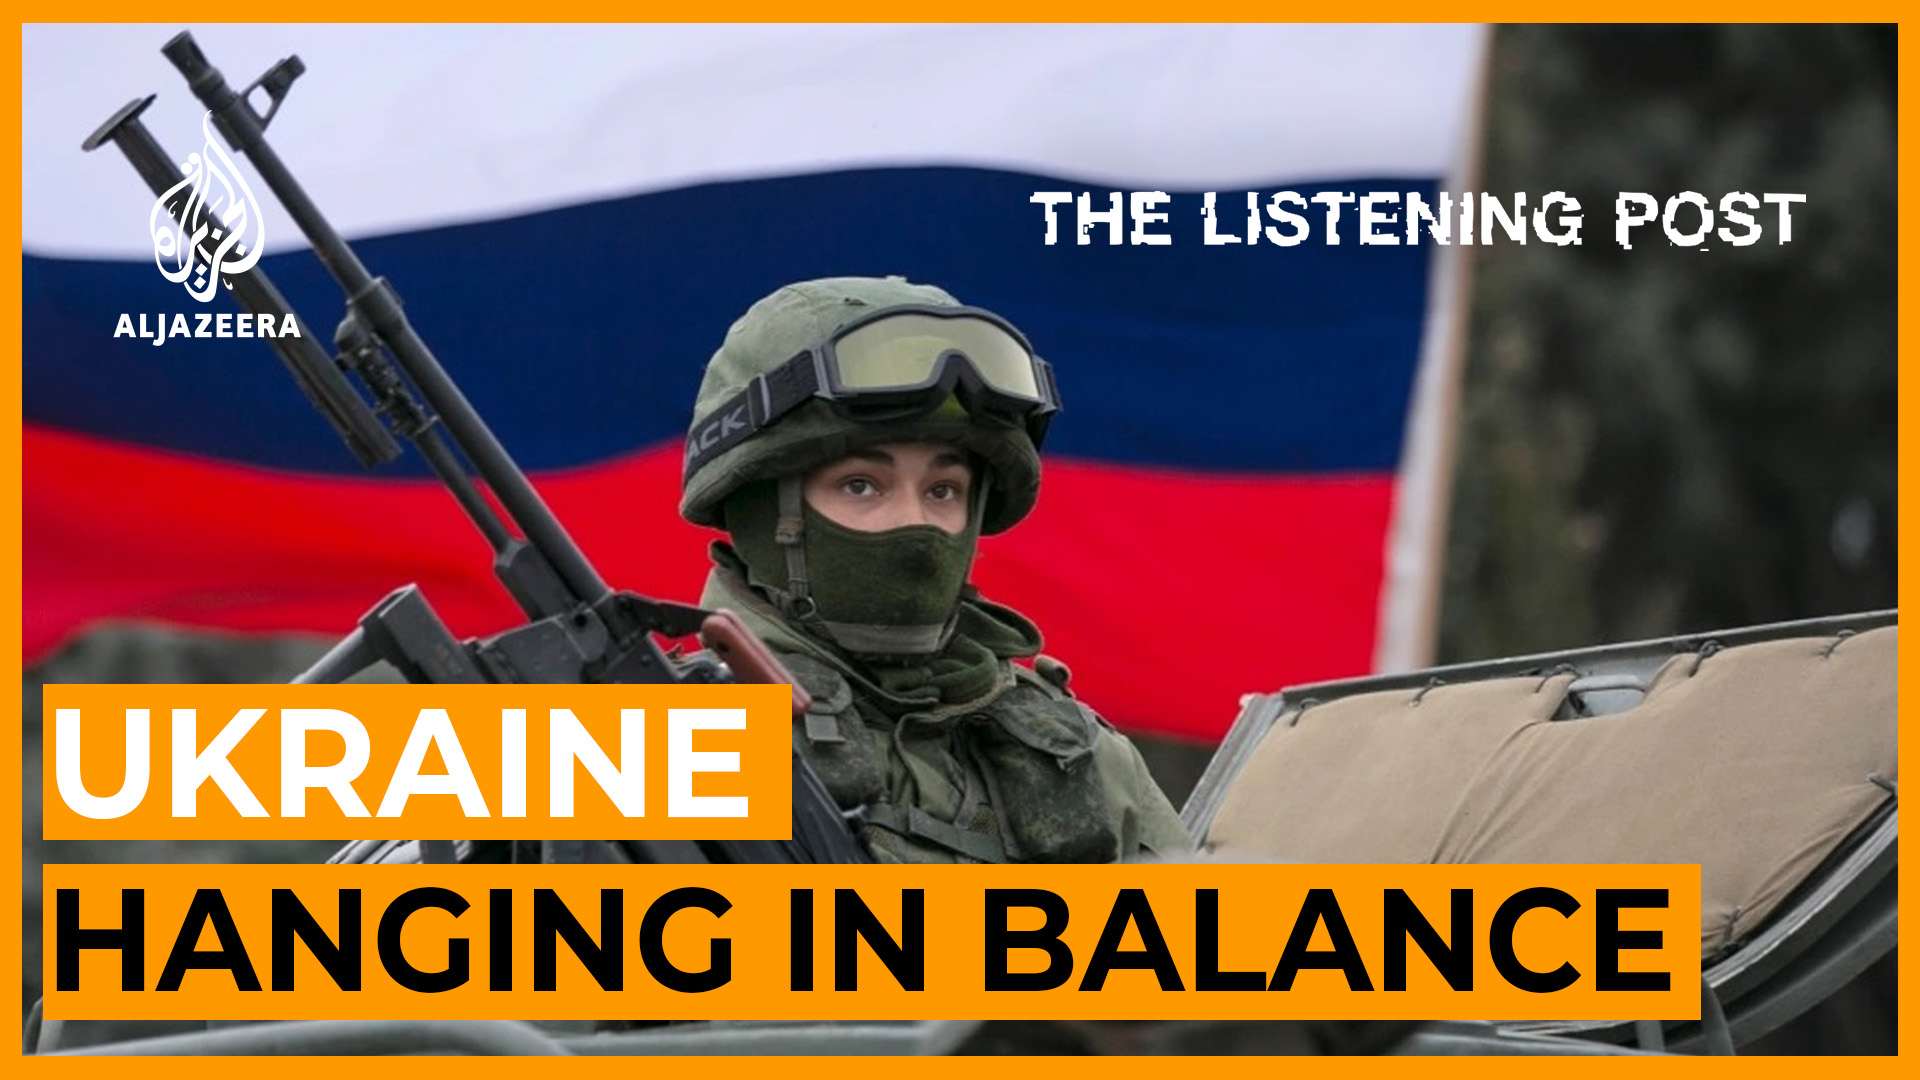 Ukraine: Cold War stereotypes and competing narratives | The Listening Post